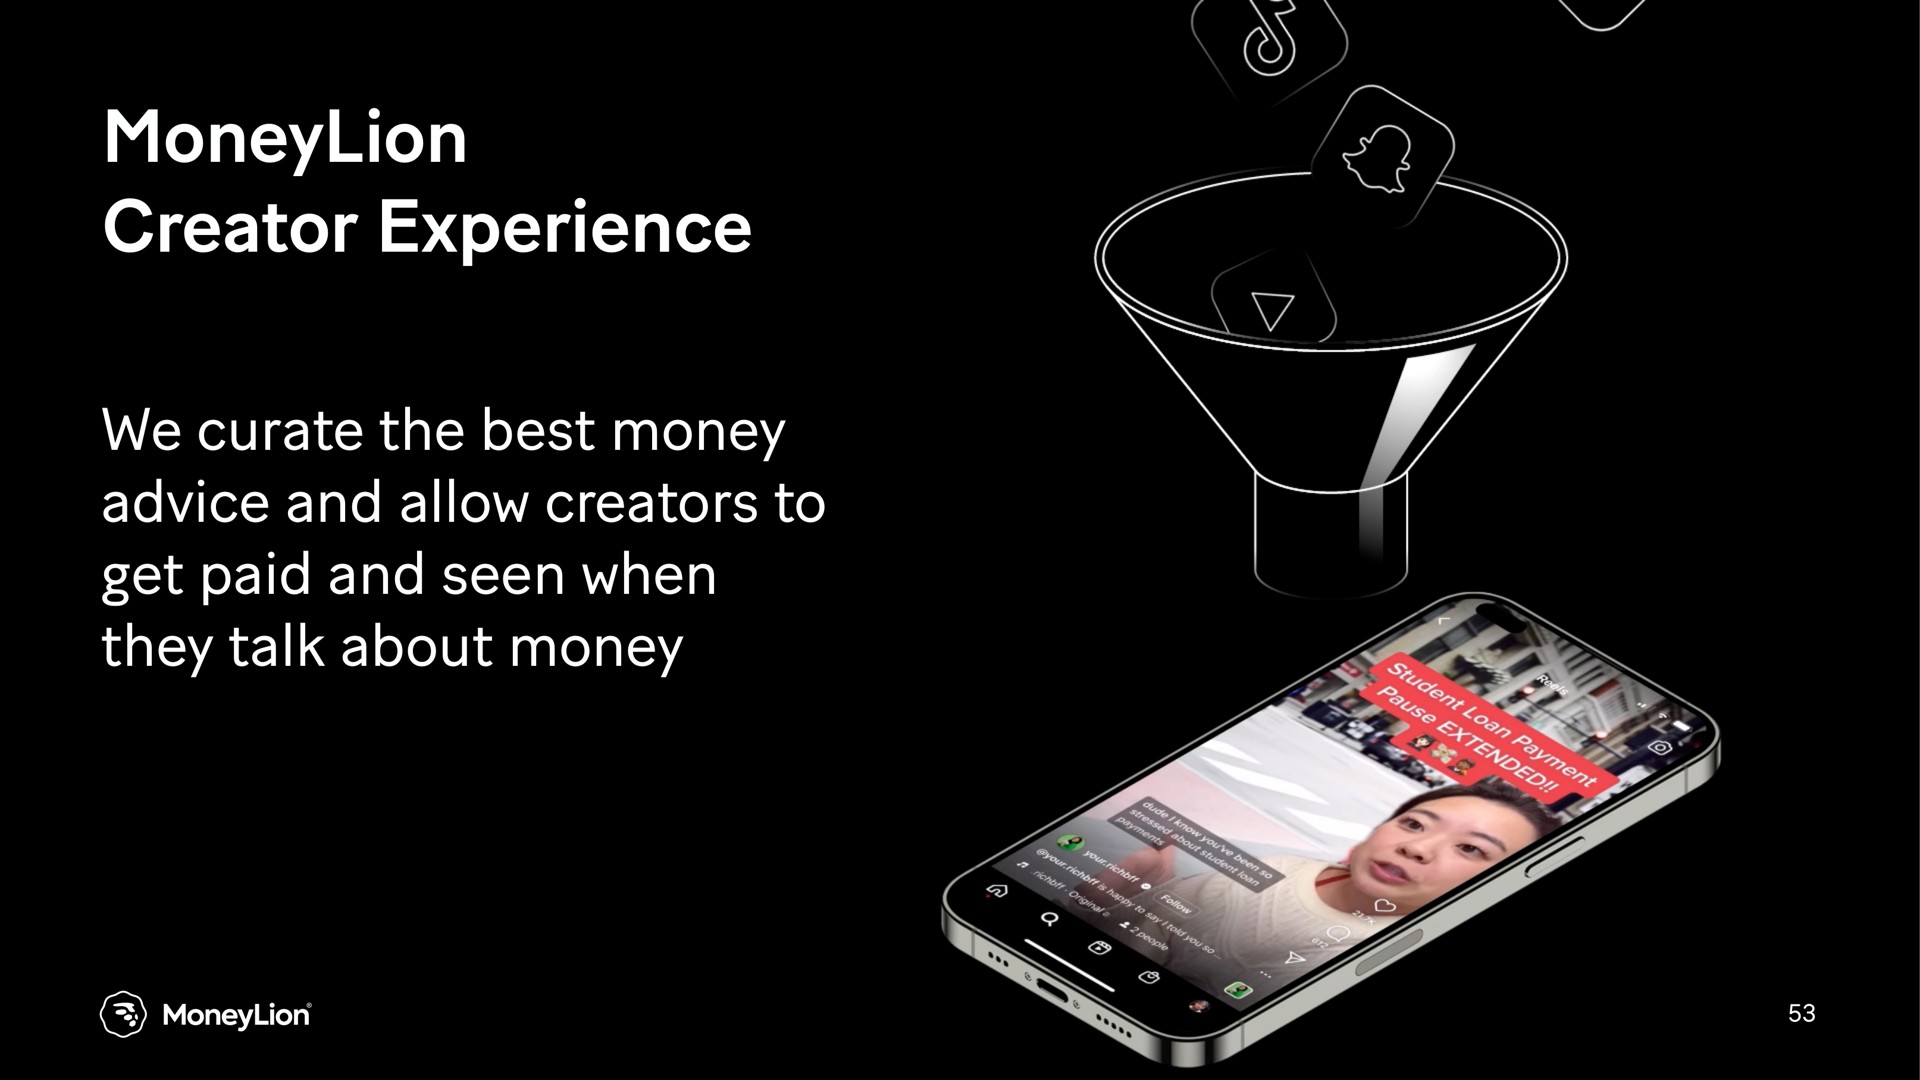 creator experience we curate the best money advice and allow creators to get paid and seen when they talk about money | MoneyLion